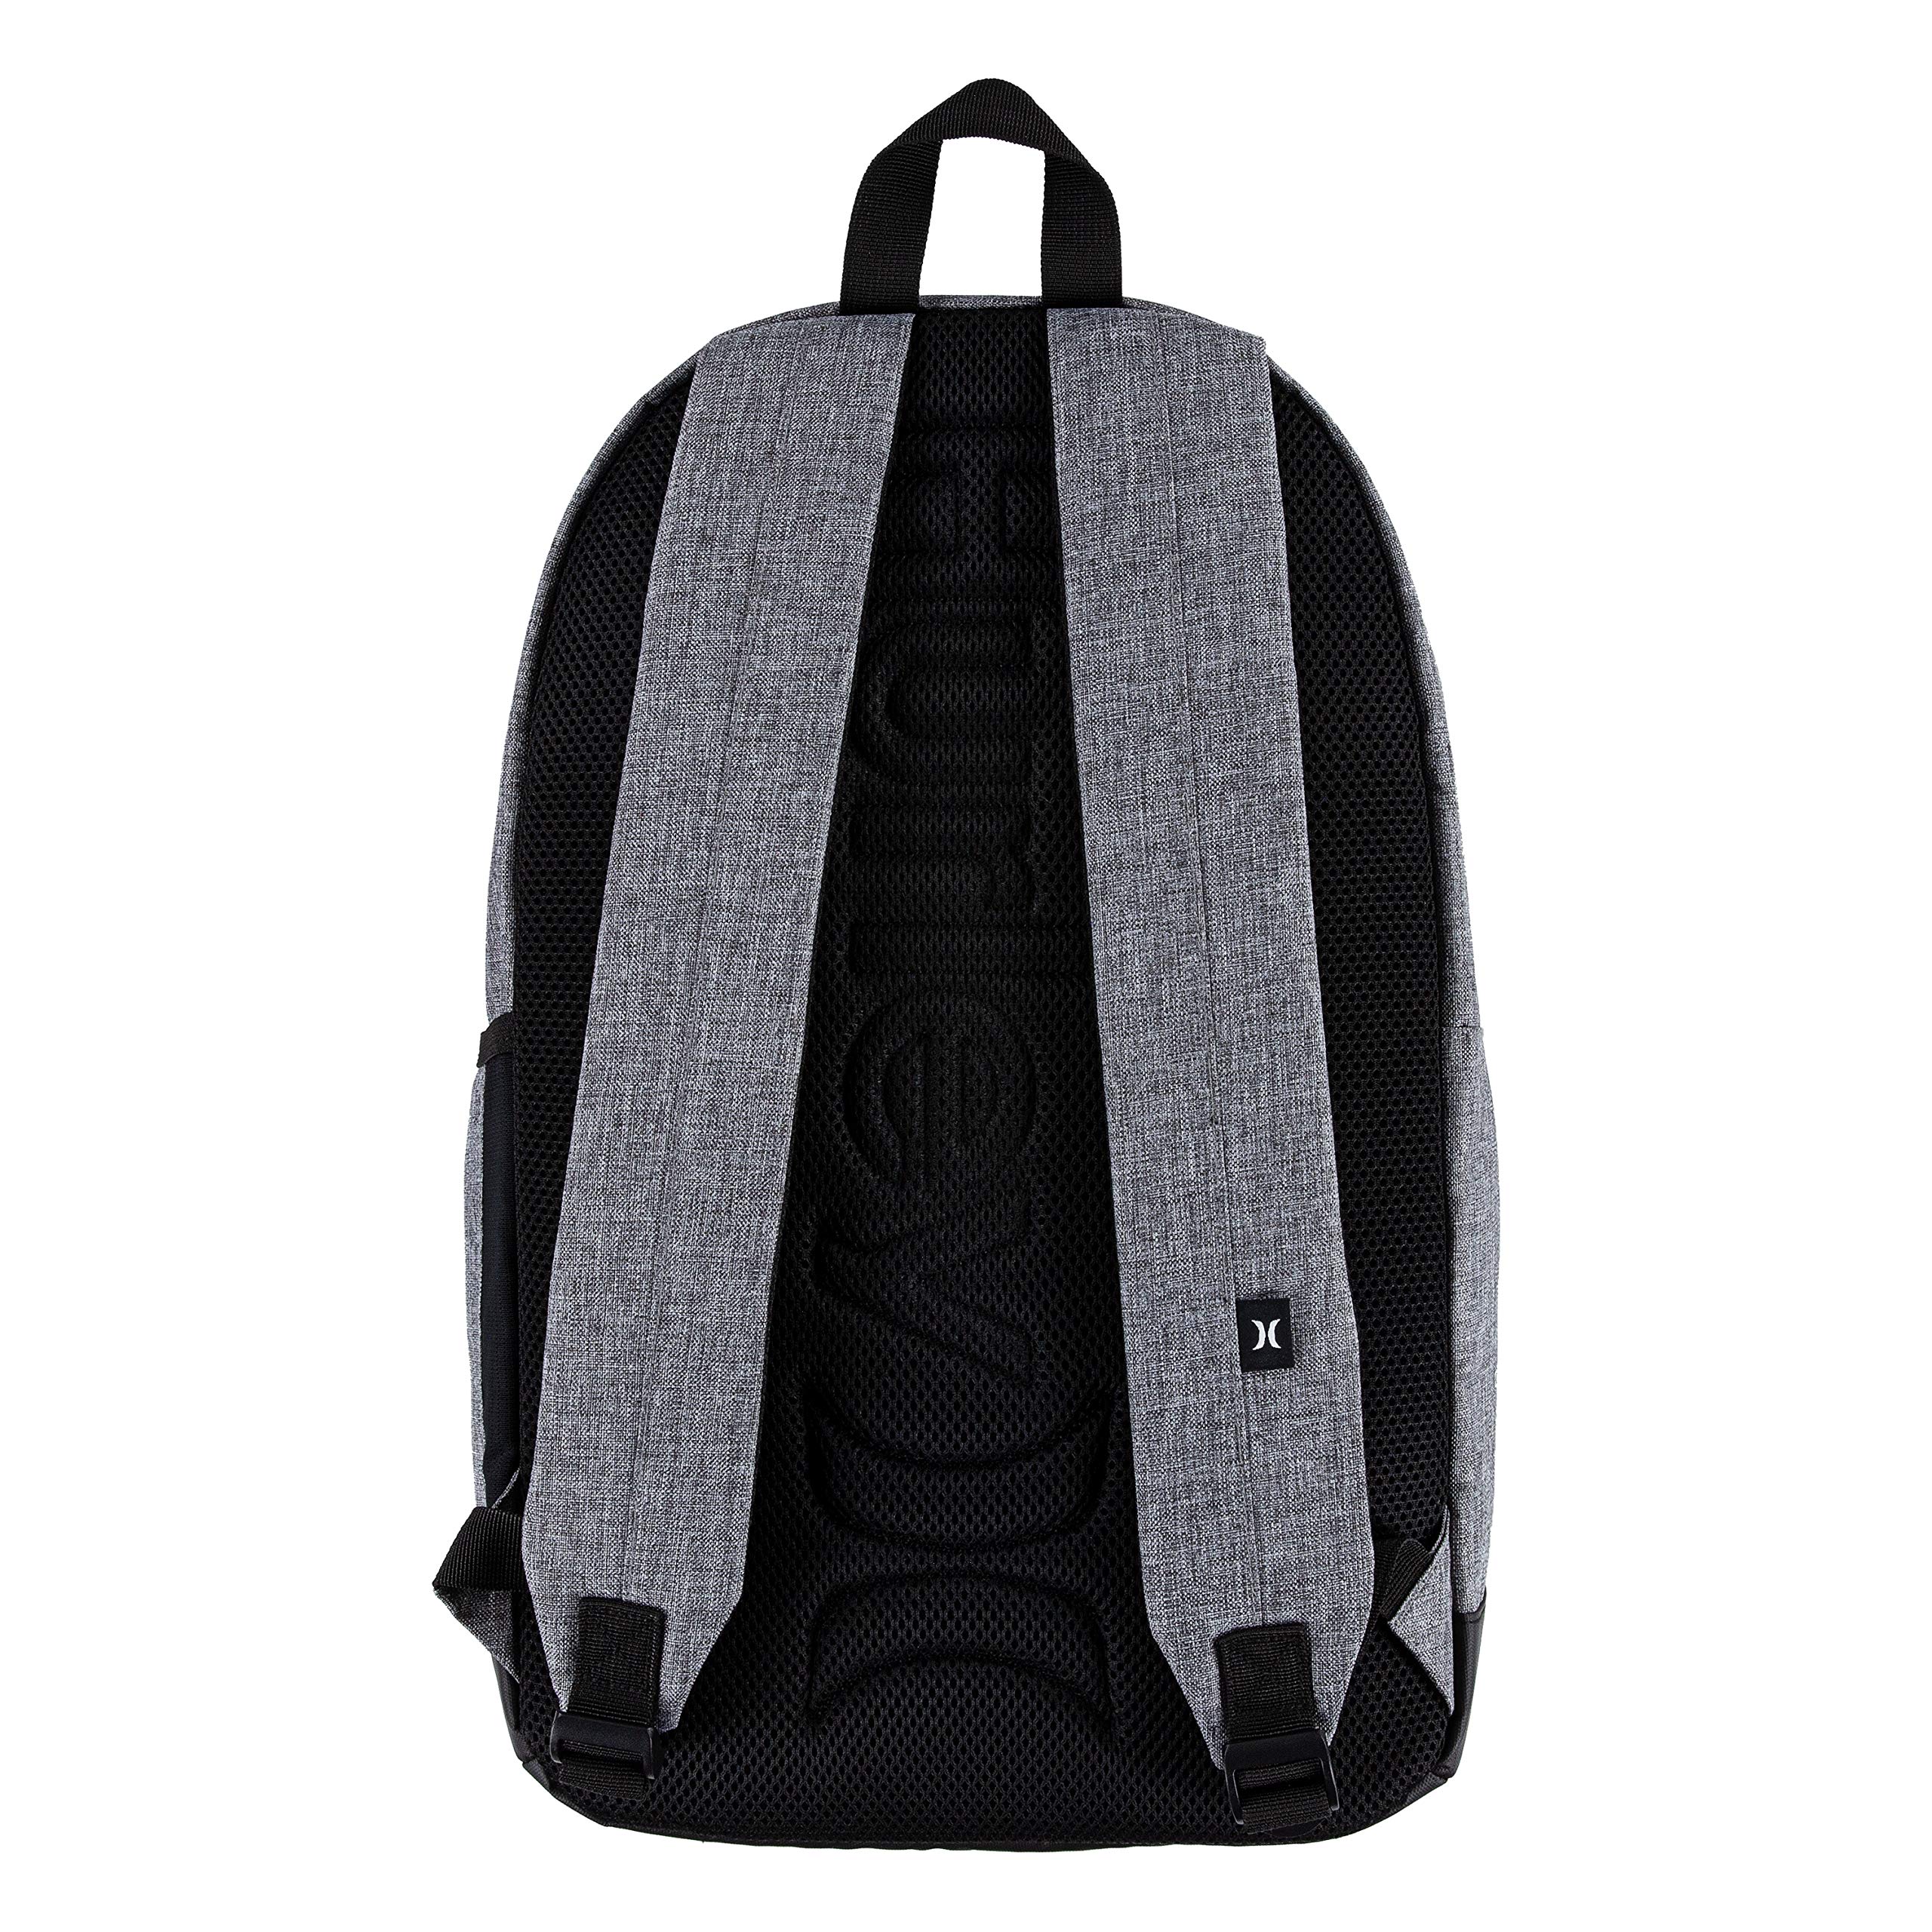 Hurley Unisex-Adults One and Only Backpack, Grey Icon, Large